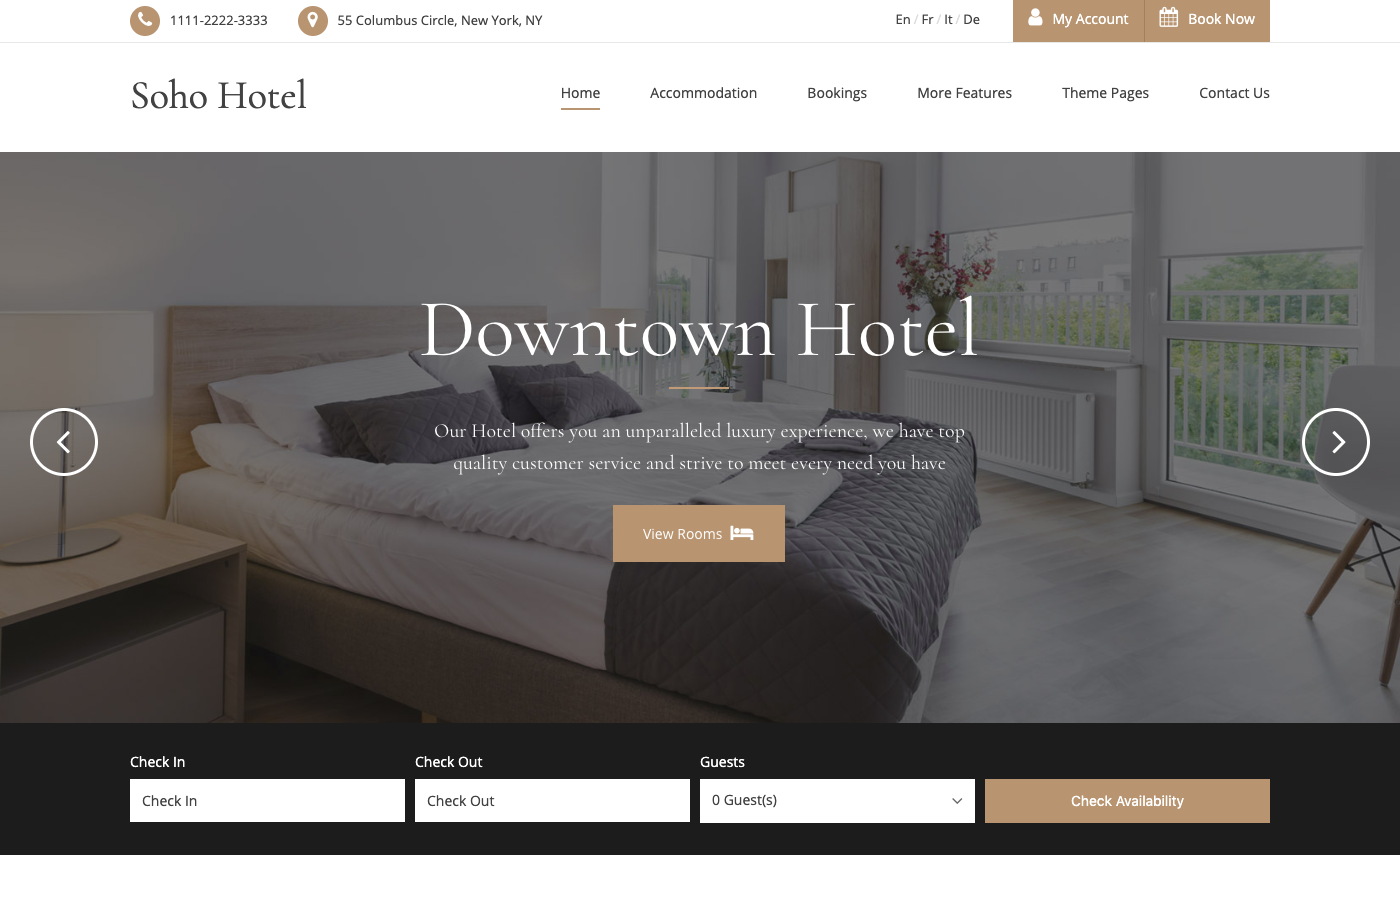 10 Feature Rich Hotel Website Templates That Will Make You Go Wow